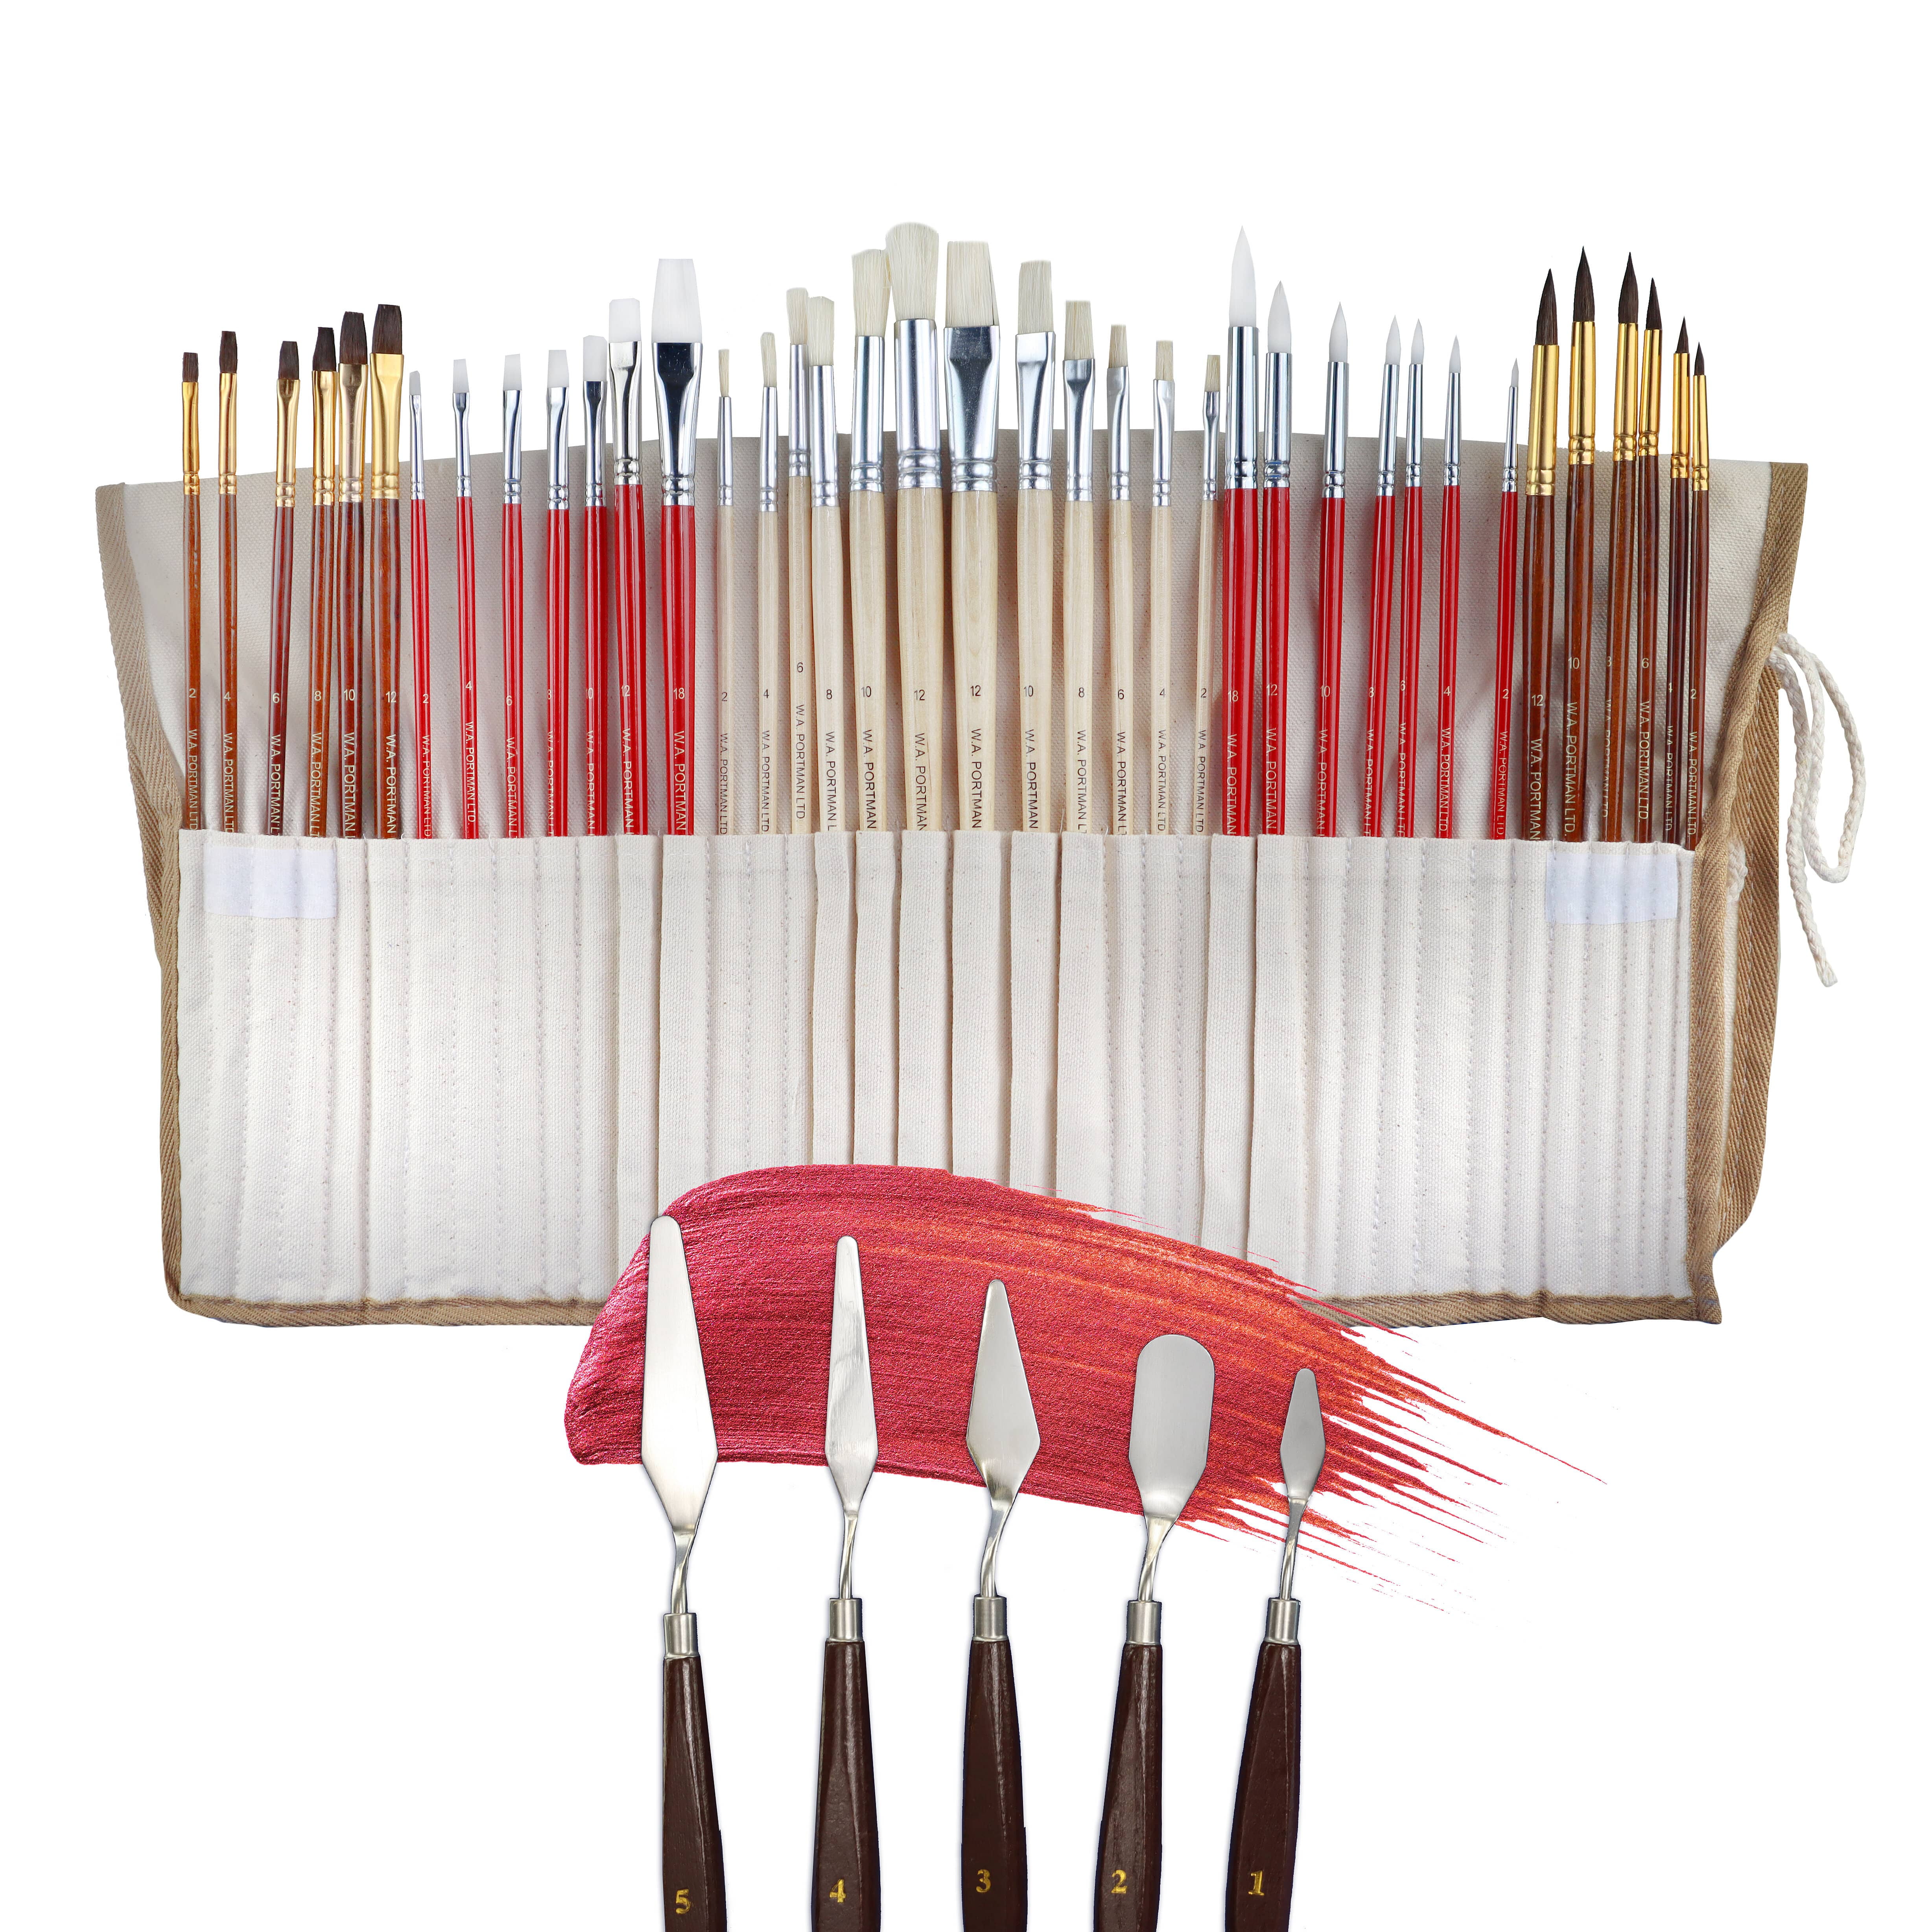 Rock Painting Falling in Art Paint Brush Set,15 PCS Bristle Artist Paint Brushes with Organizing Roll Pouch Artist Set for Acrylic Oil Watercolor